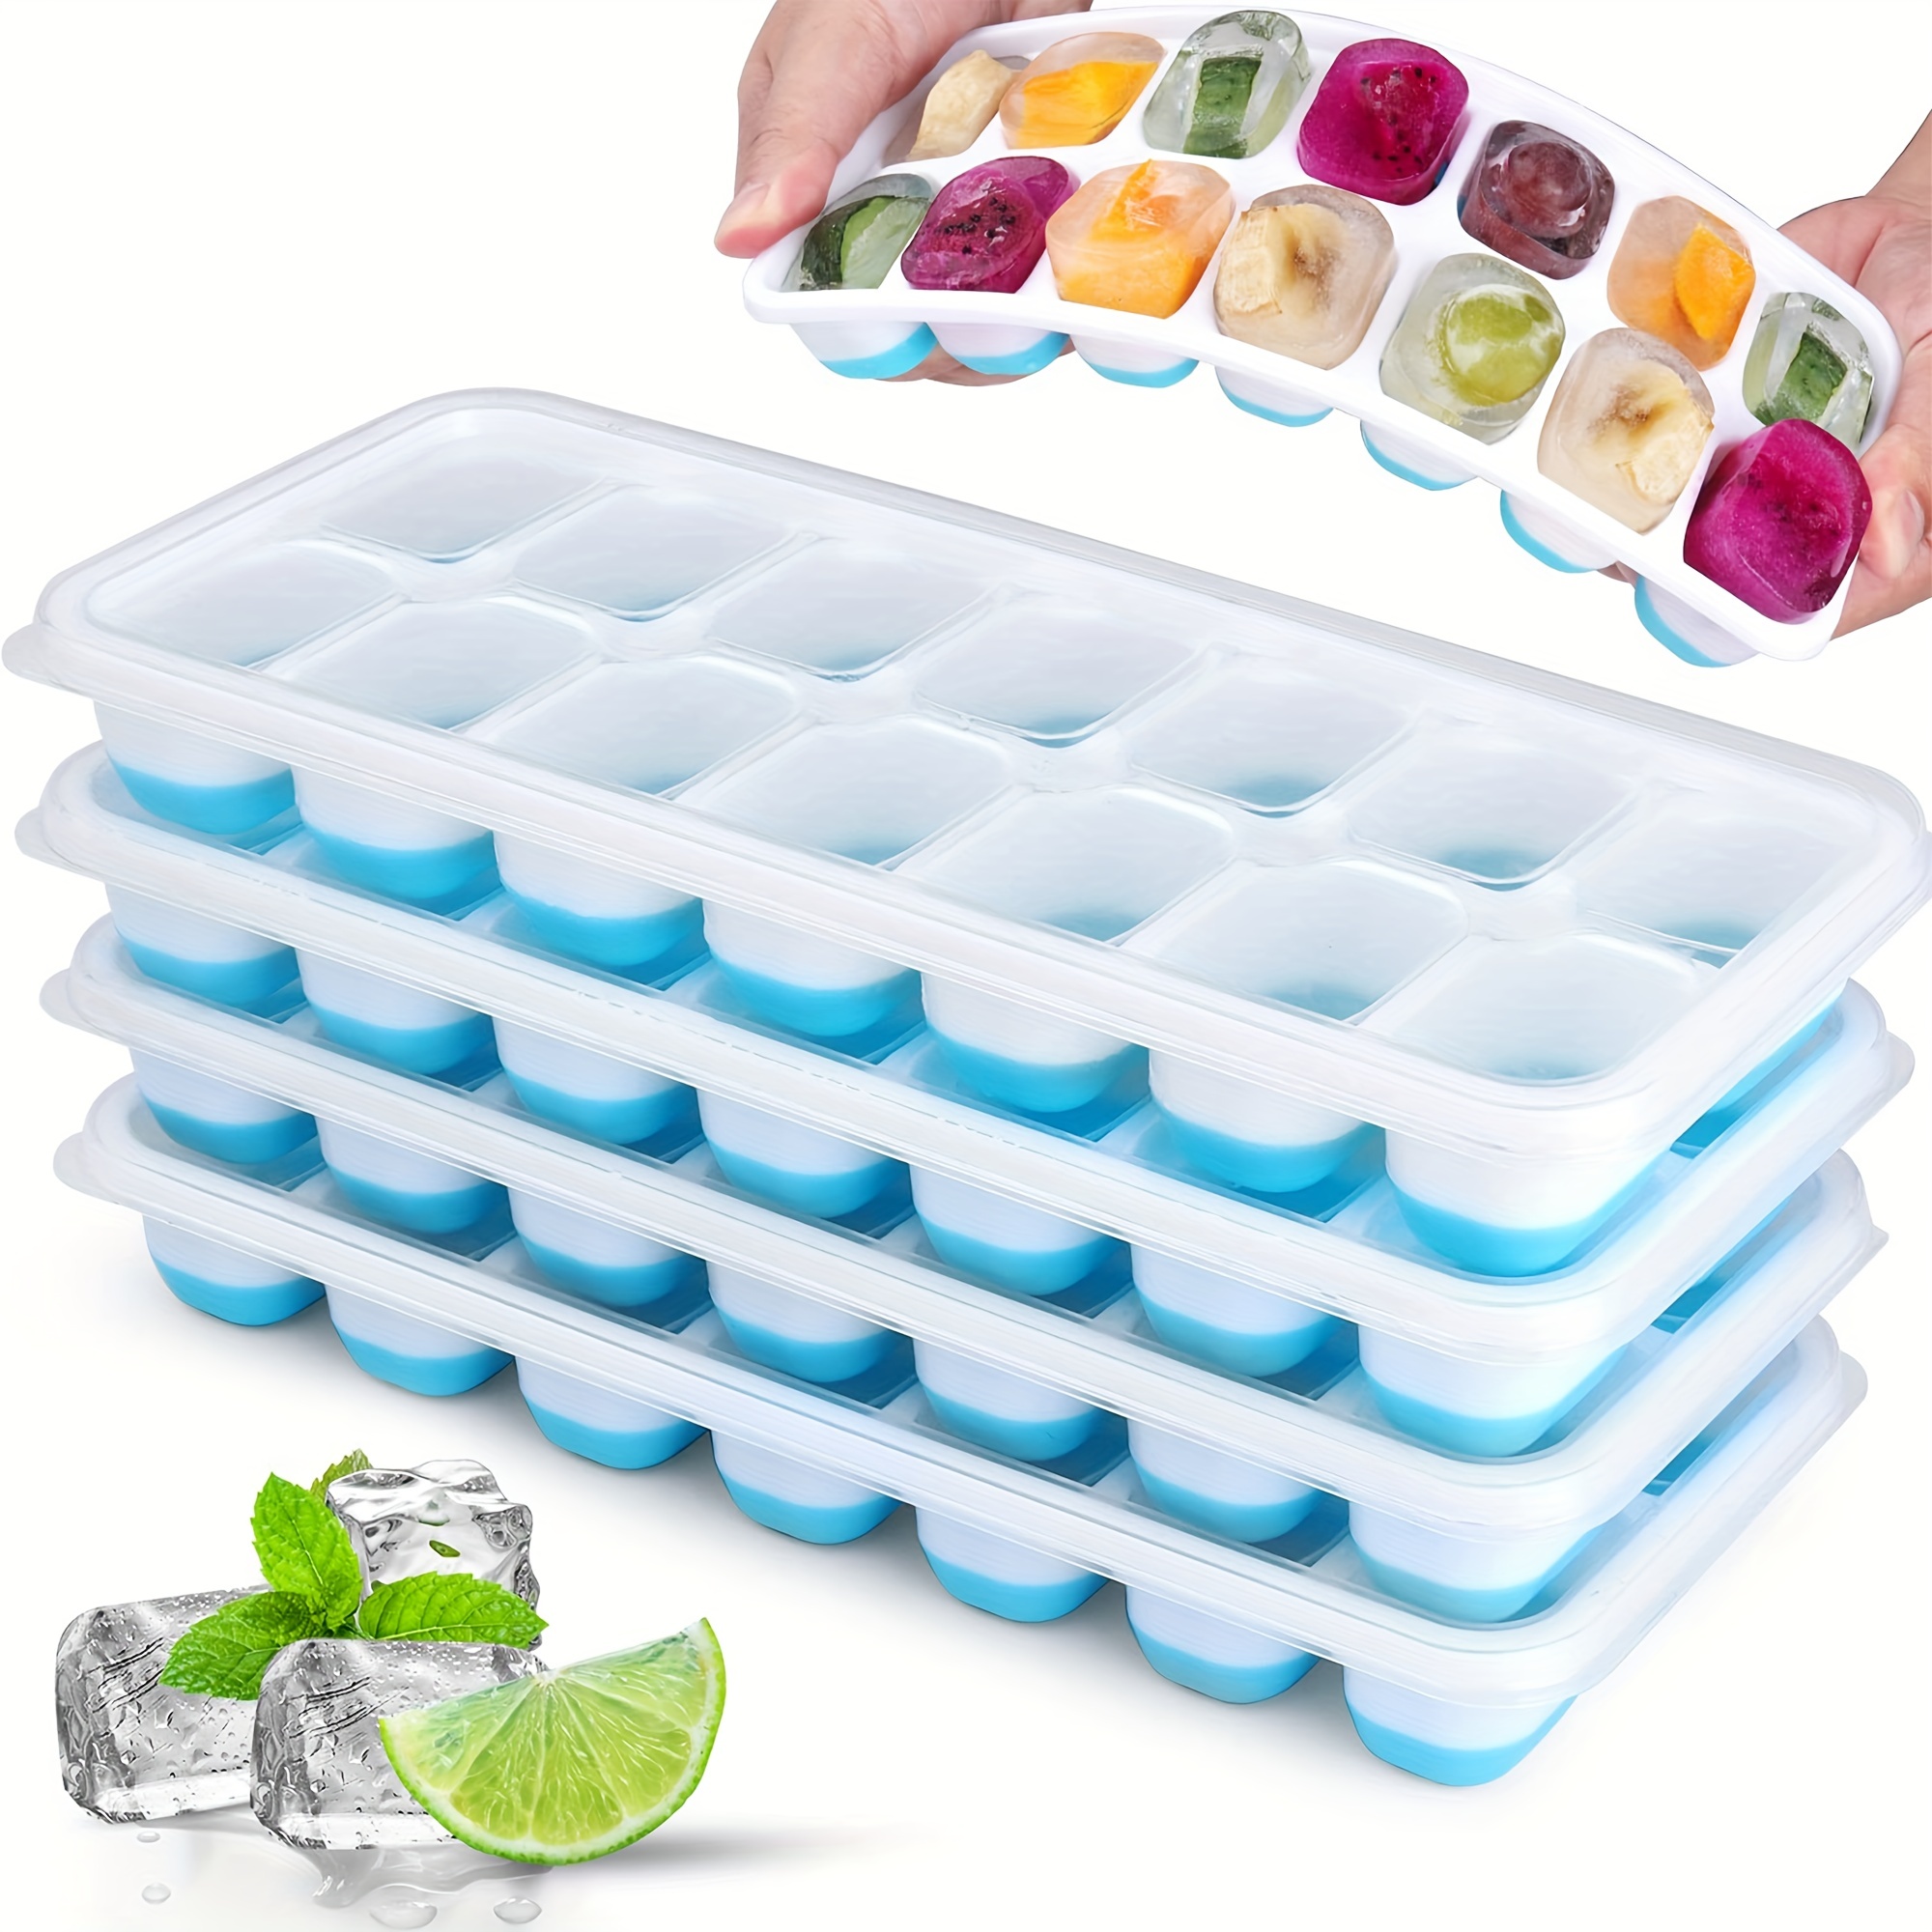  Ice Cube Trays, Reusable Pumpkin Ice Cube Mold Trays, Silicone  Ice Cube Tray with Lid for Whiskey, Cocktail, Beer, Fruit Juice: Home &  Kitchen